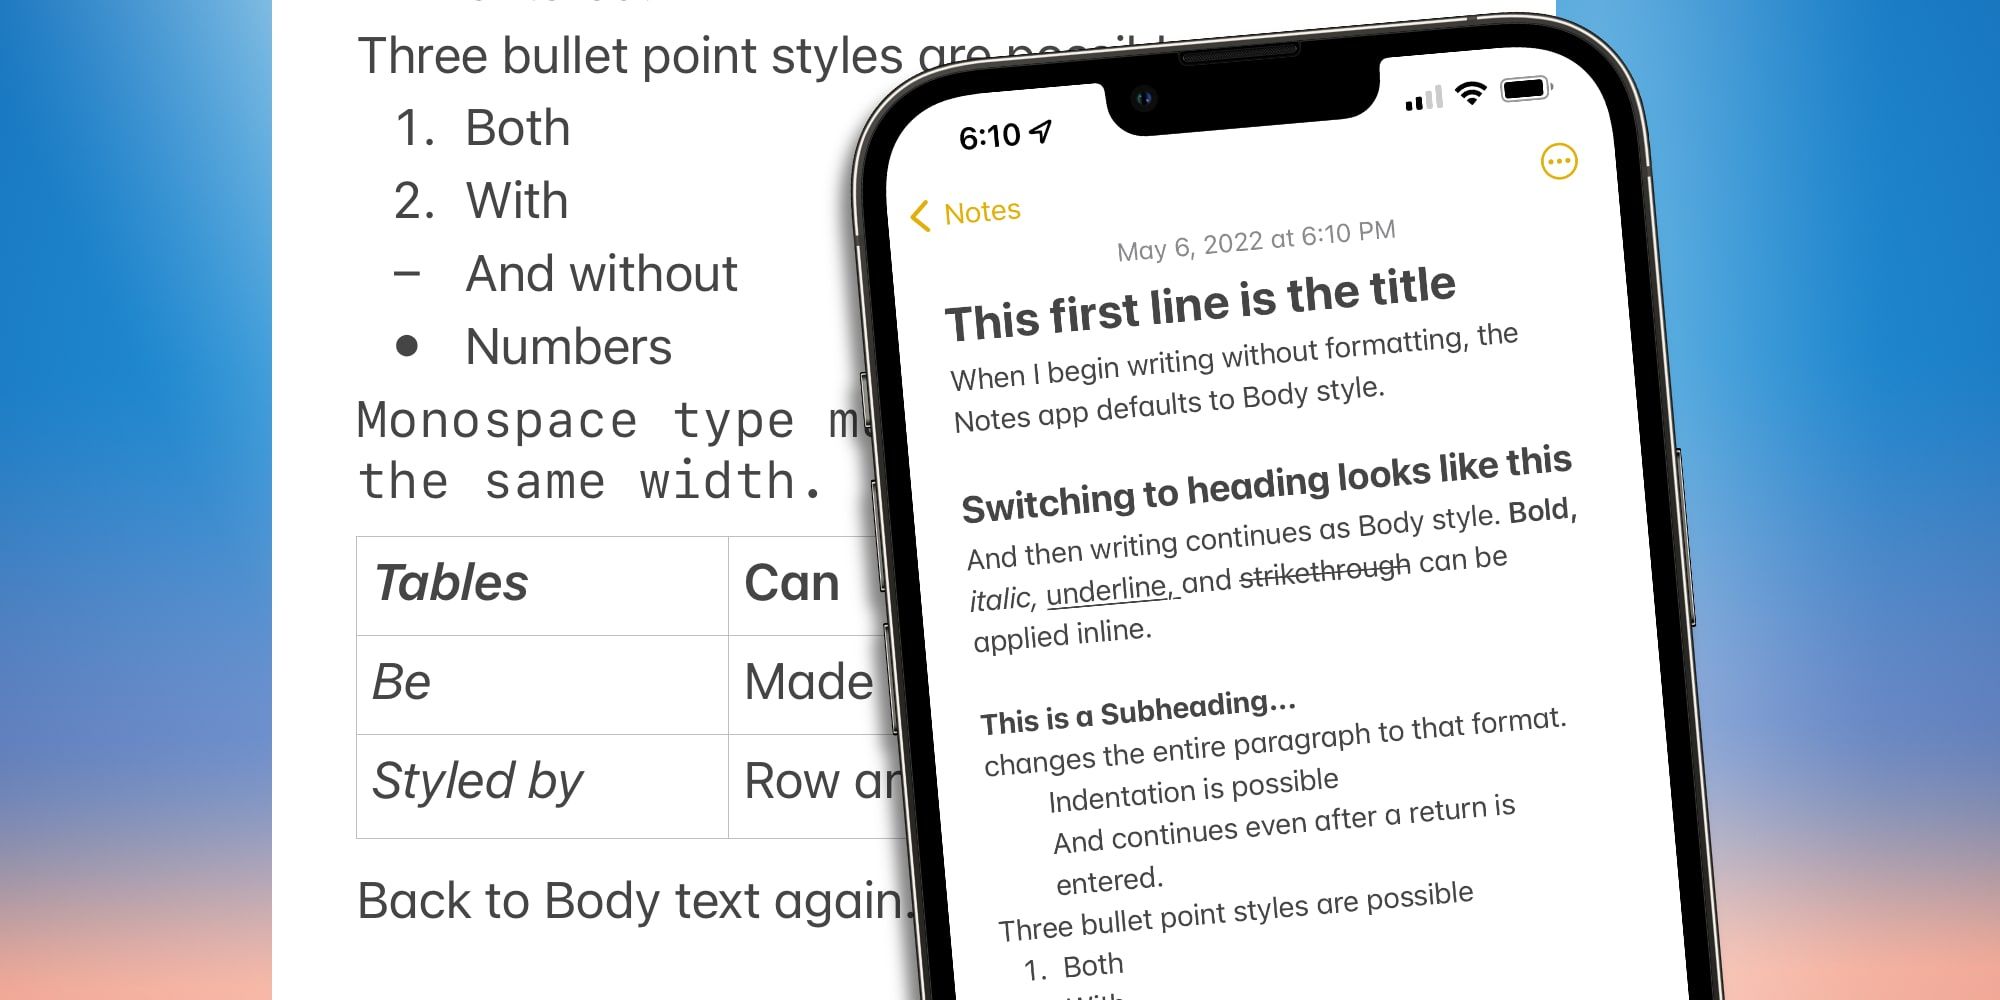 How To Style & Format Text In The iPhone's Notes App